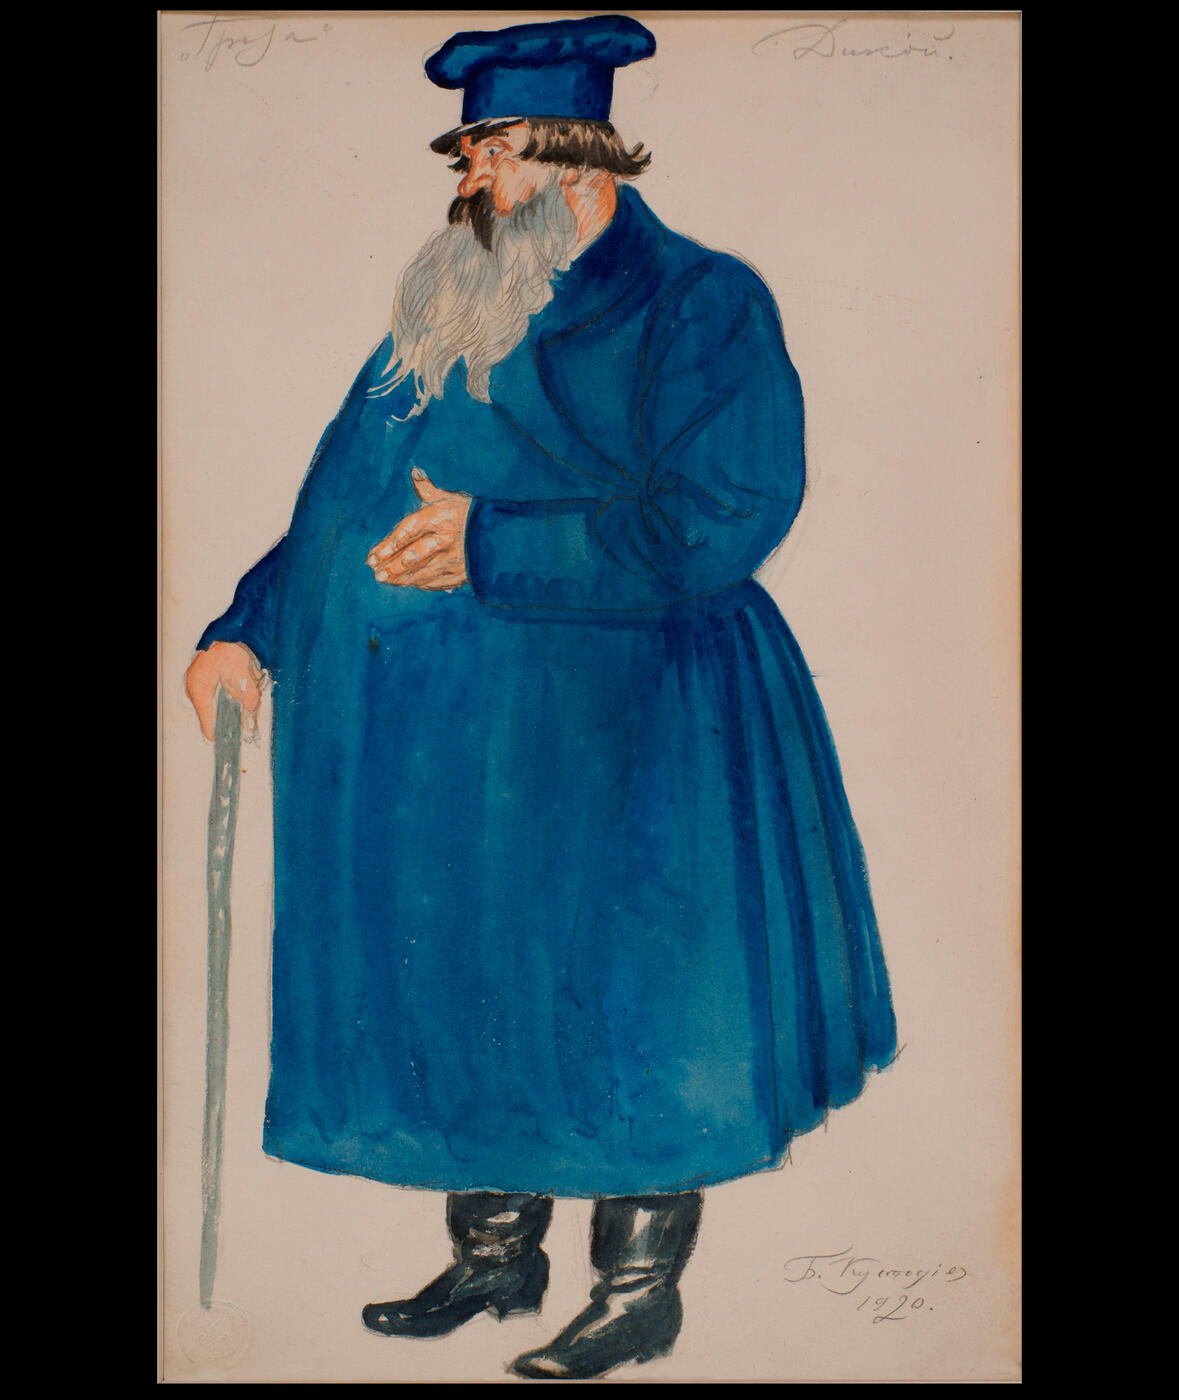 Costume Design for the Merchant Dikoy from Alexander Ostrovsky's Play "The Storm"